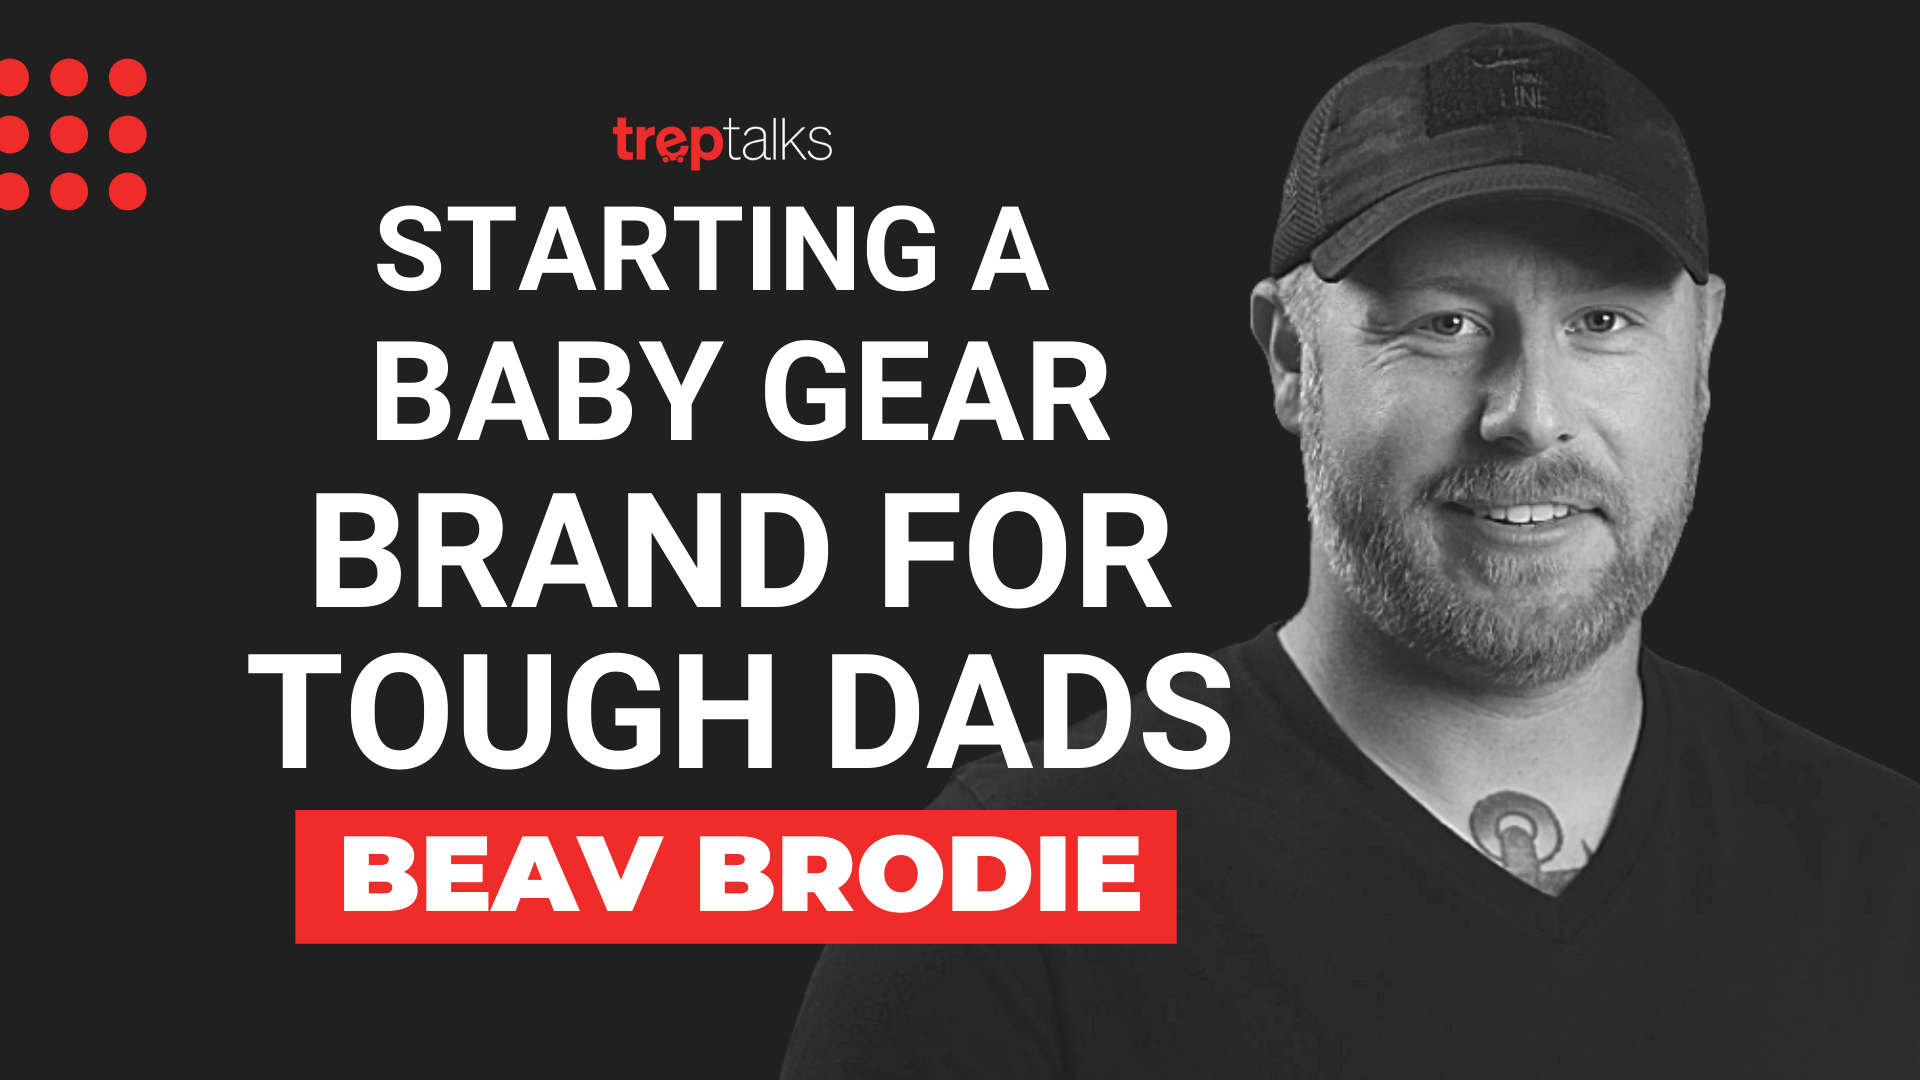 DadGear Being a Dad means you carry stuff, so get the gear that